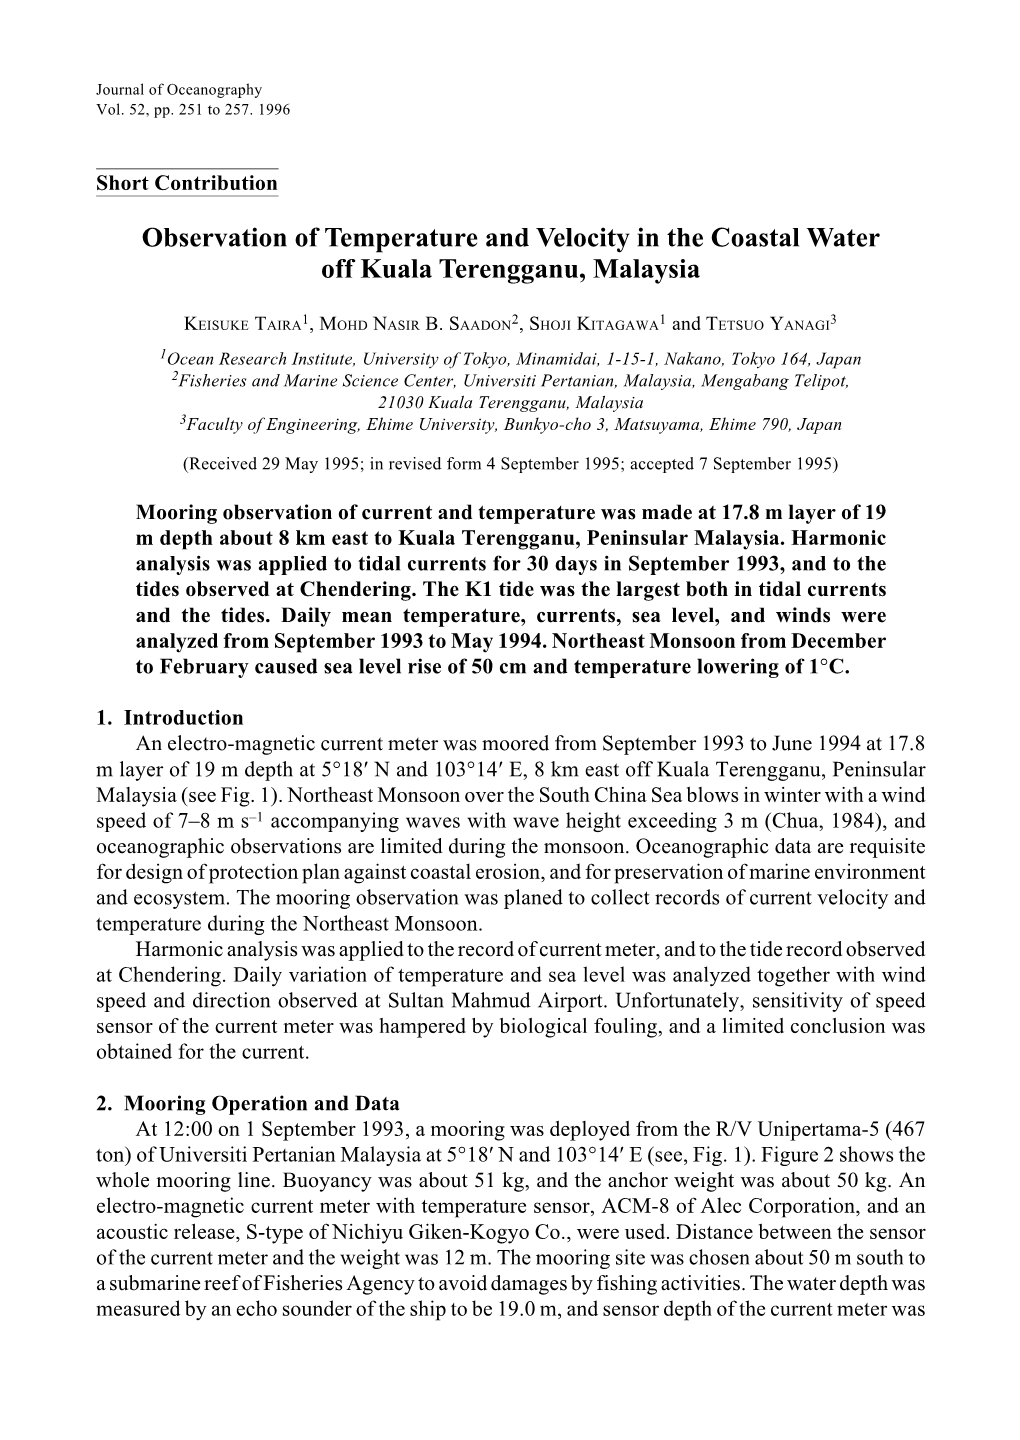 Observation of Temperature and Velocity in the Coastal Water Off Kuala Terengganu, Malaysia